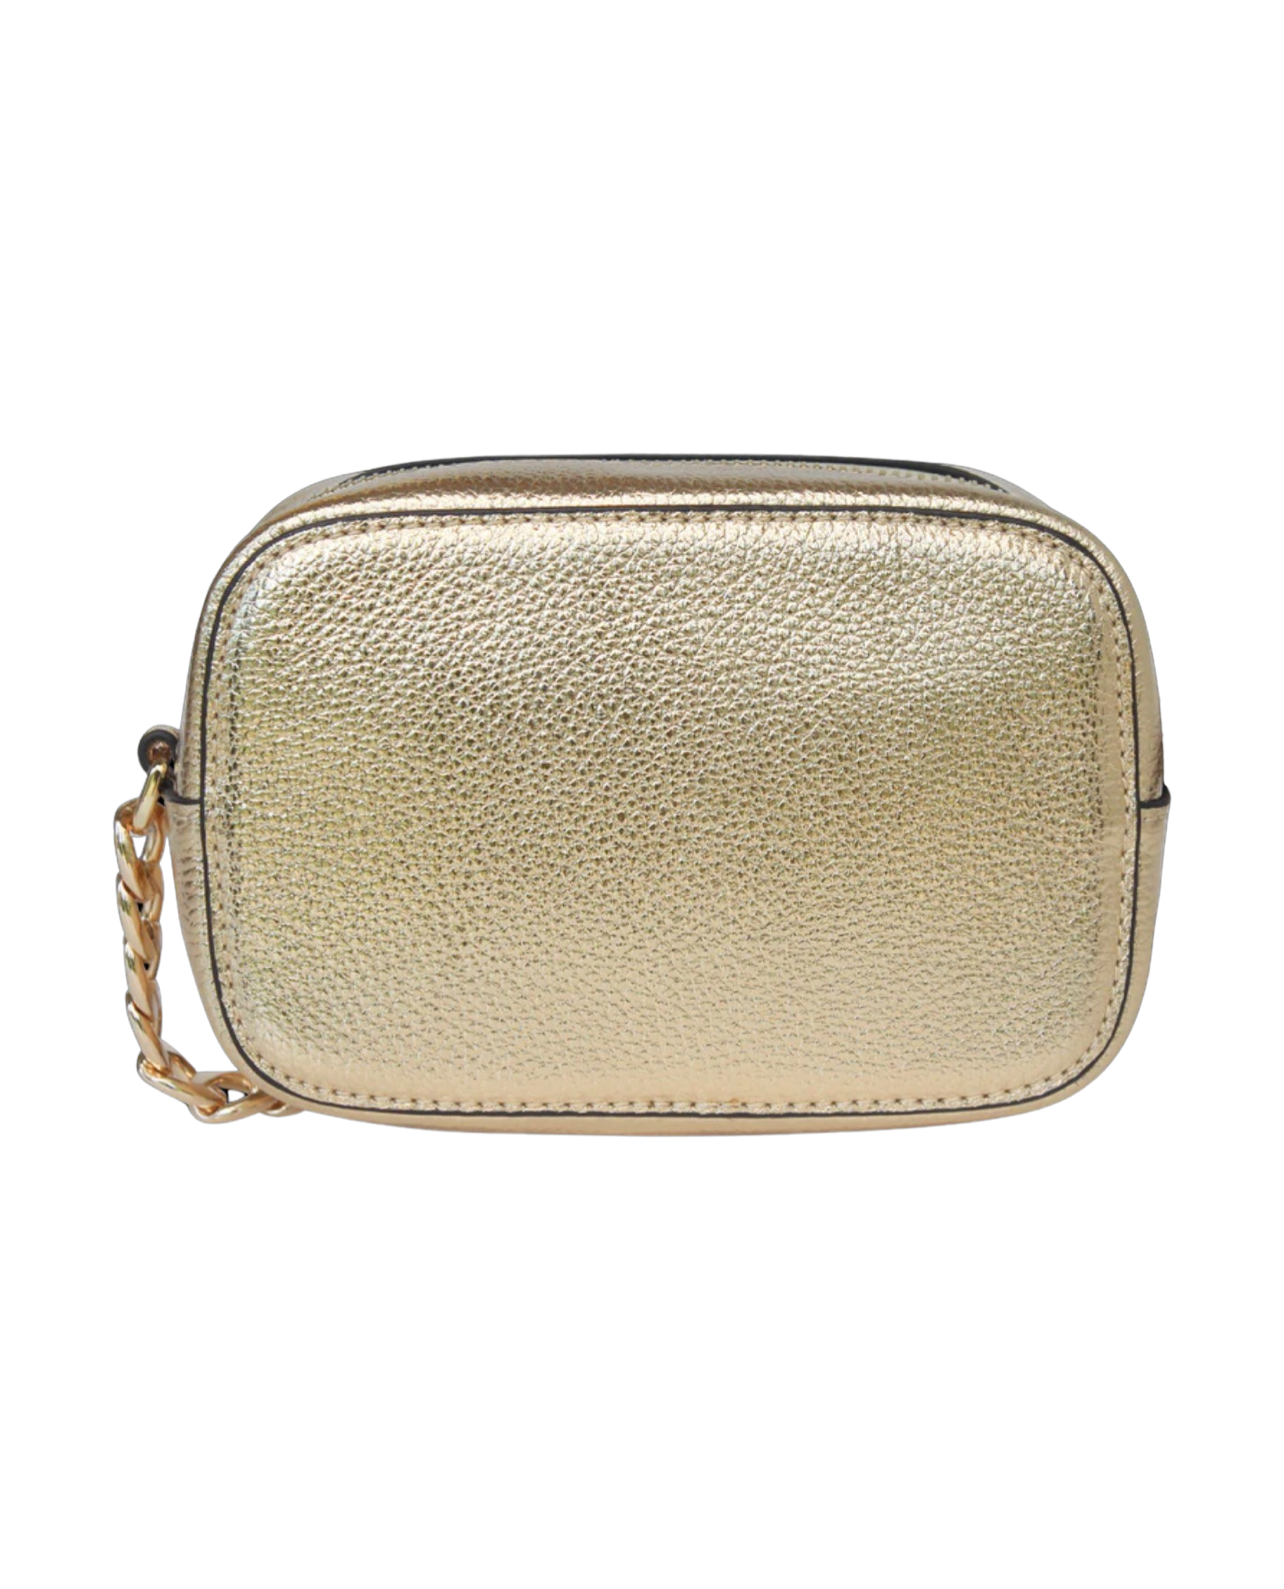 Blanchfield Bag By Kathryn Wilson - Gold Pebble